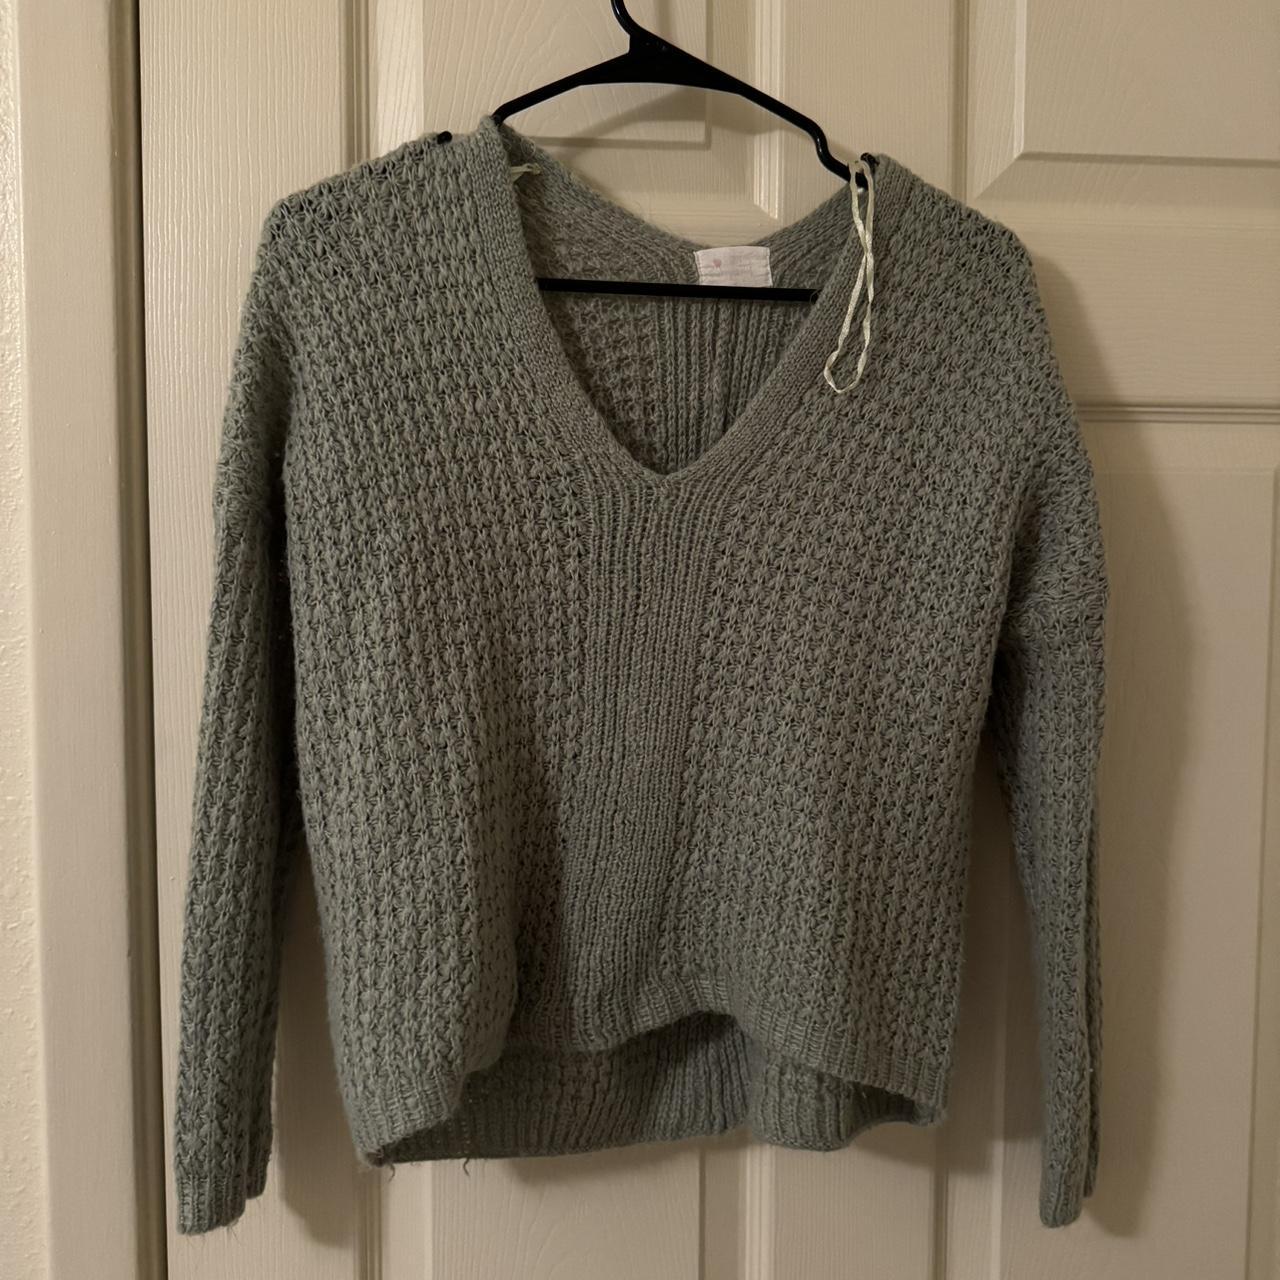 Sage green sweater from forever 21 - Depop